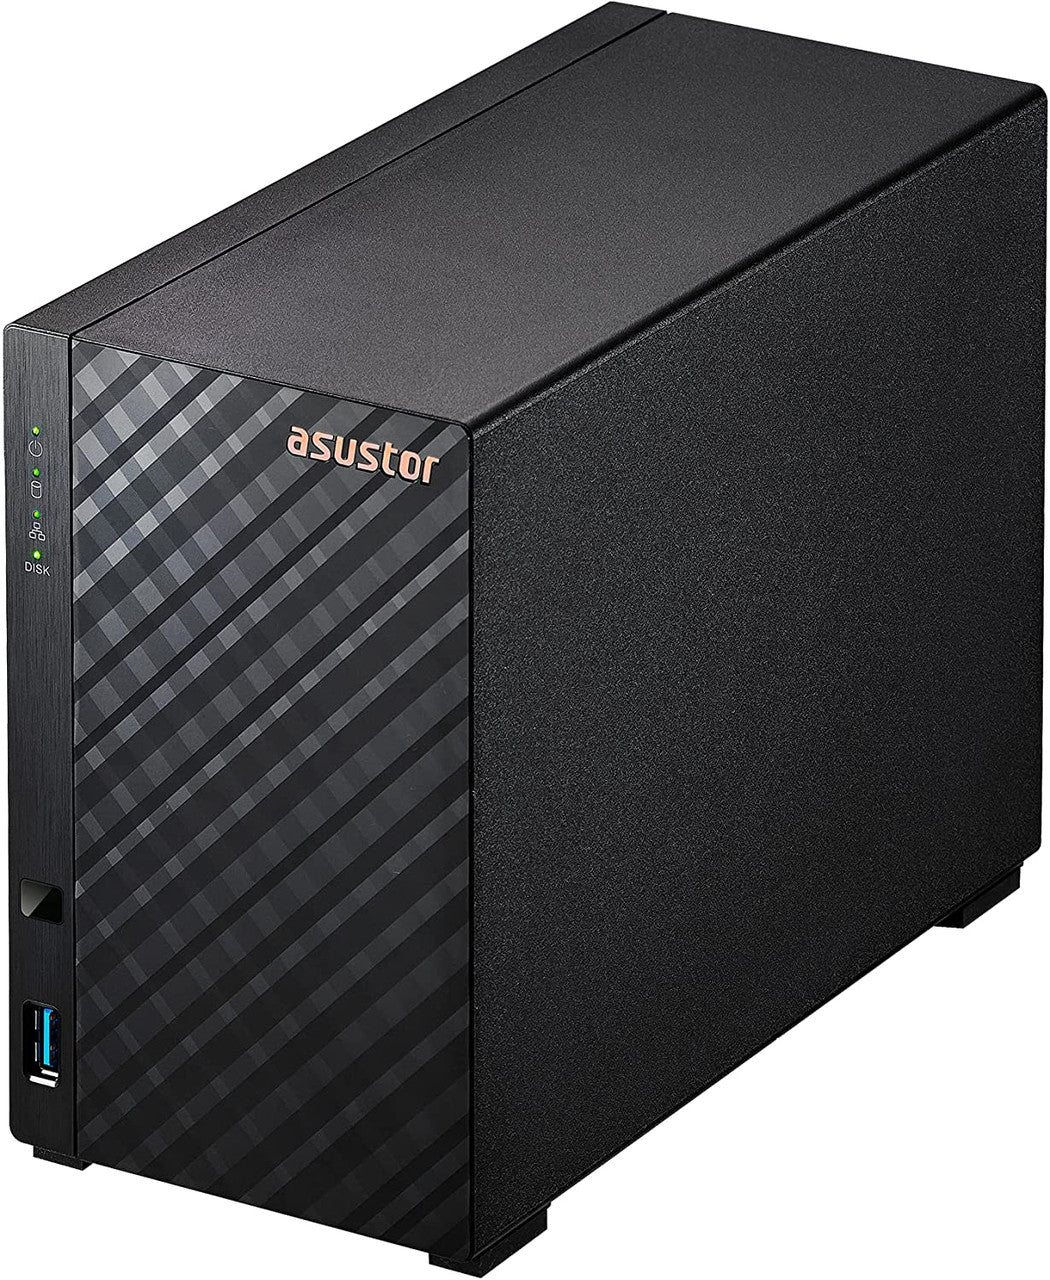 Asustor AS1102T 2-Bay Drivestor 2 NAS with 1GB RAM and 4TB (2x2TB) Seagate Ironwolf NAS Drives